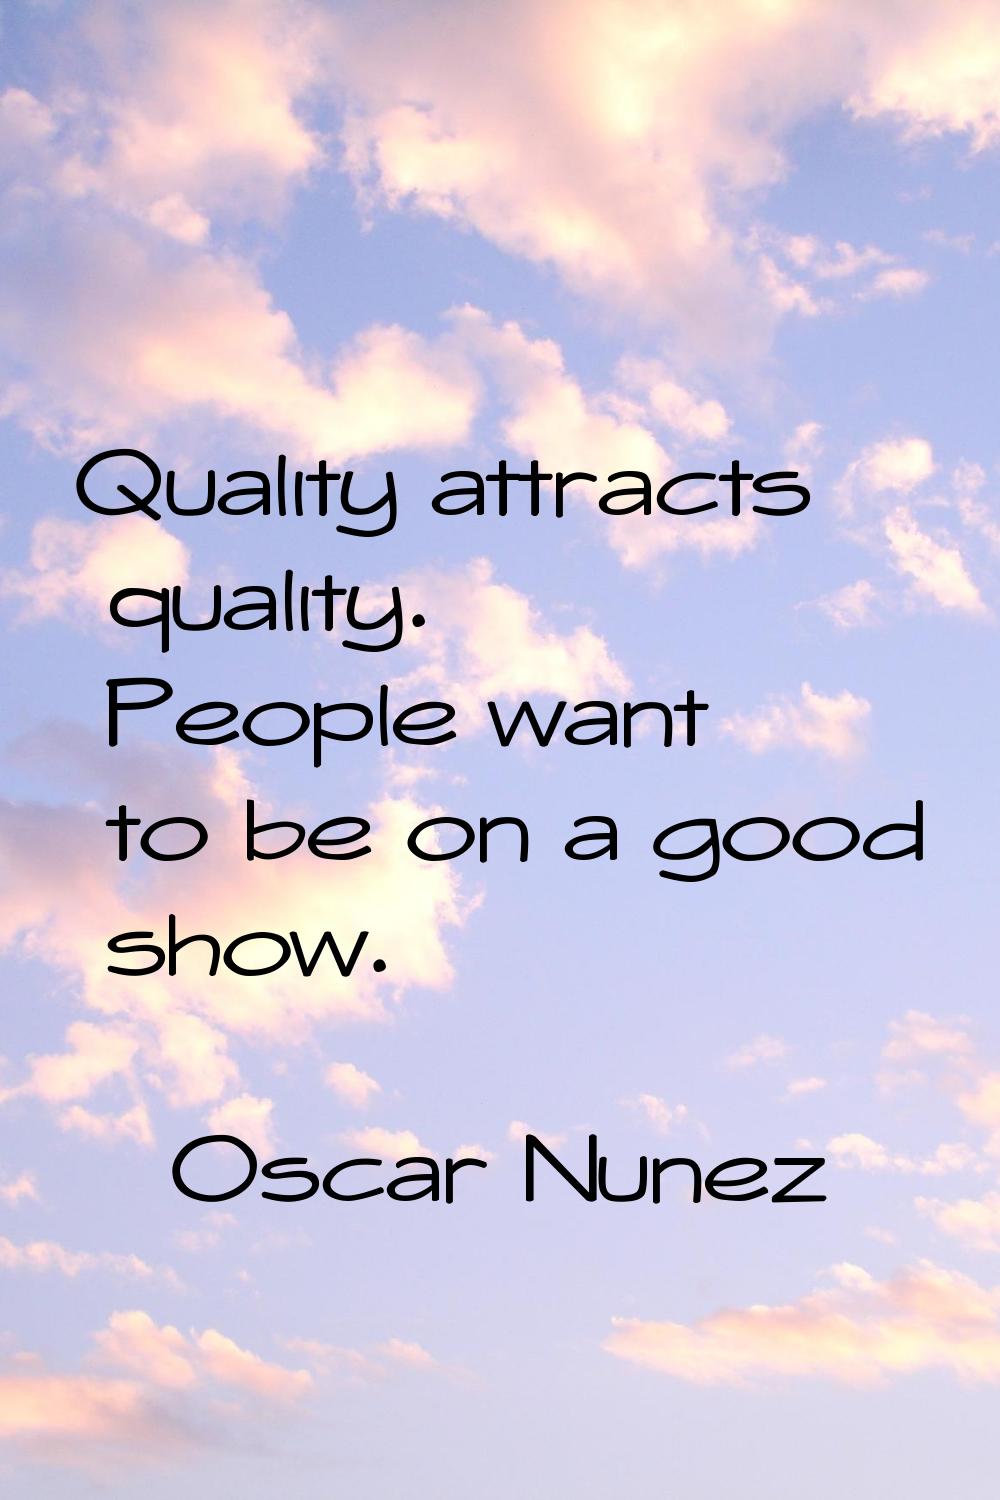 Quality attracts quality. People want to be on a good show.